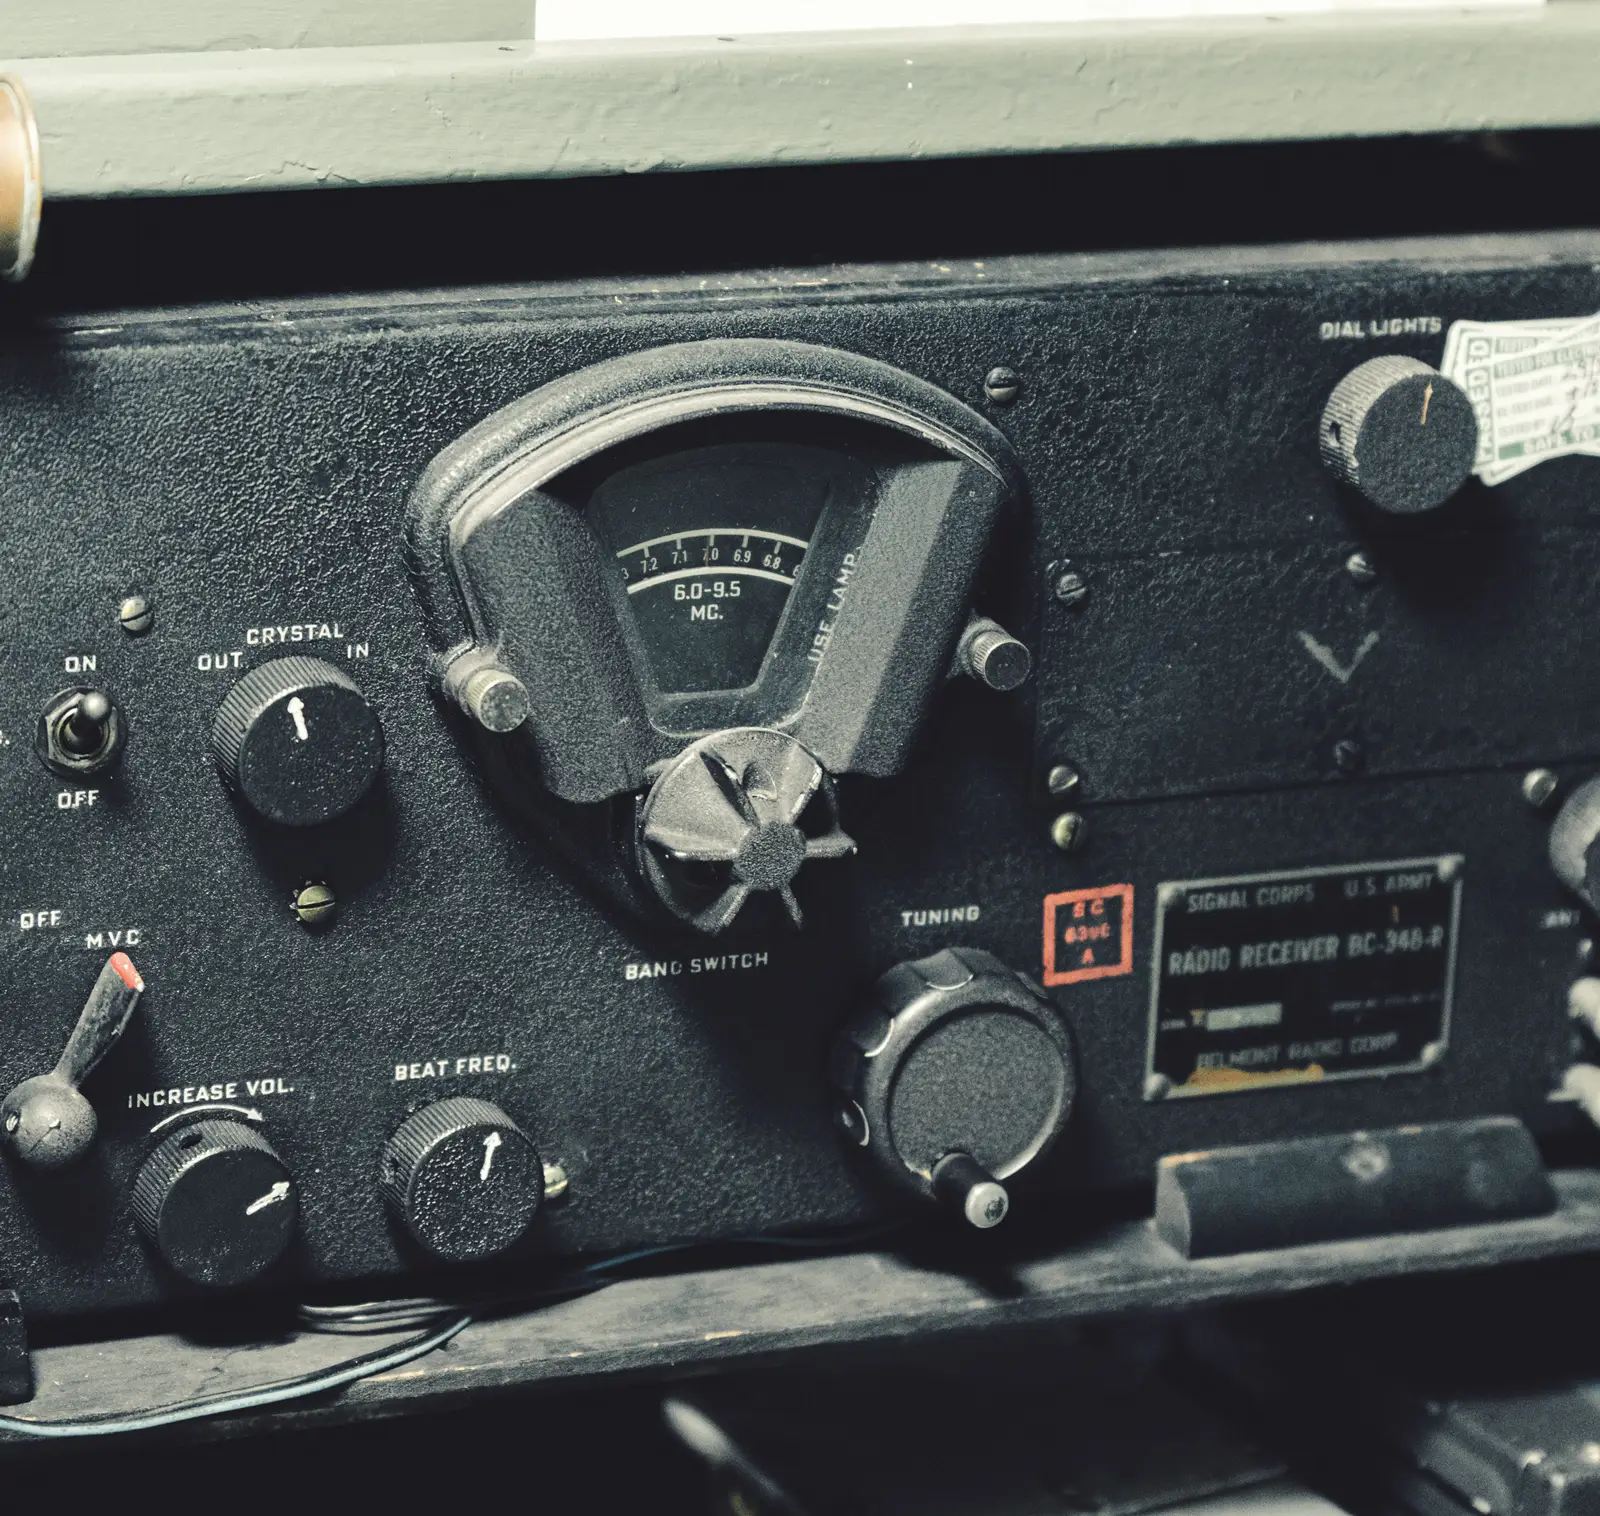 Front of Army BC-348 radio receiver